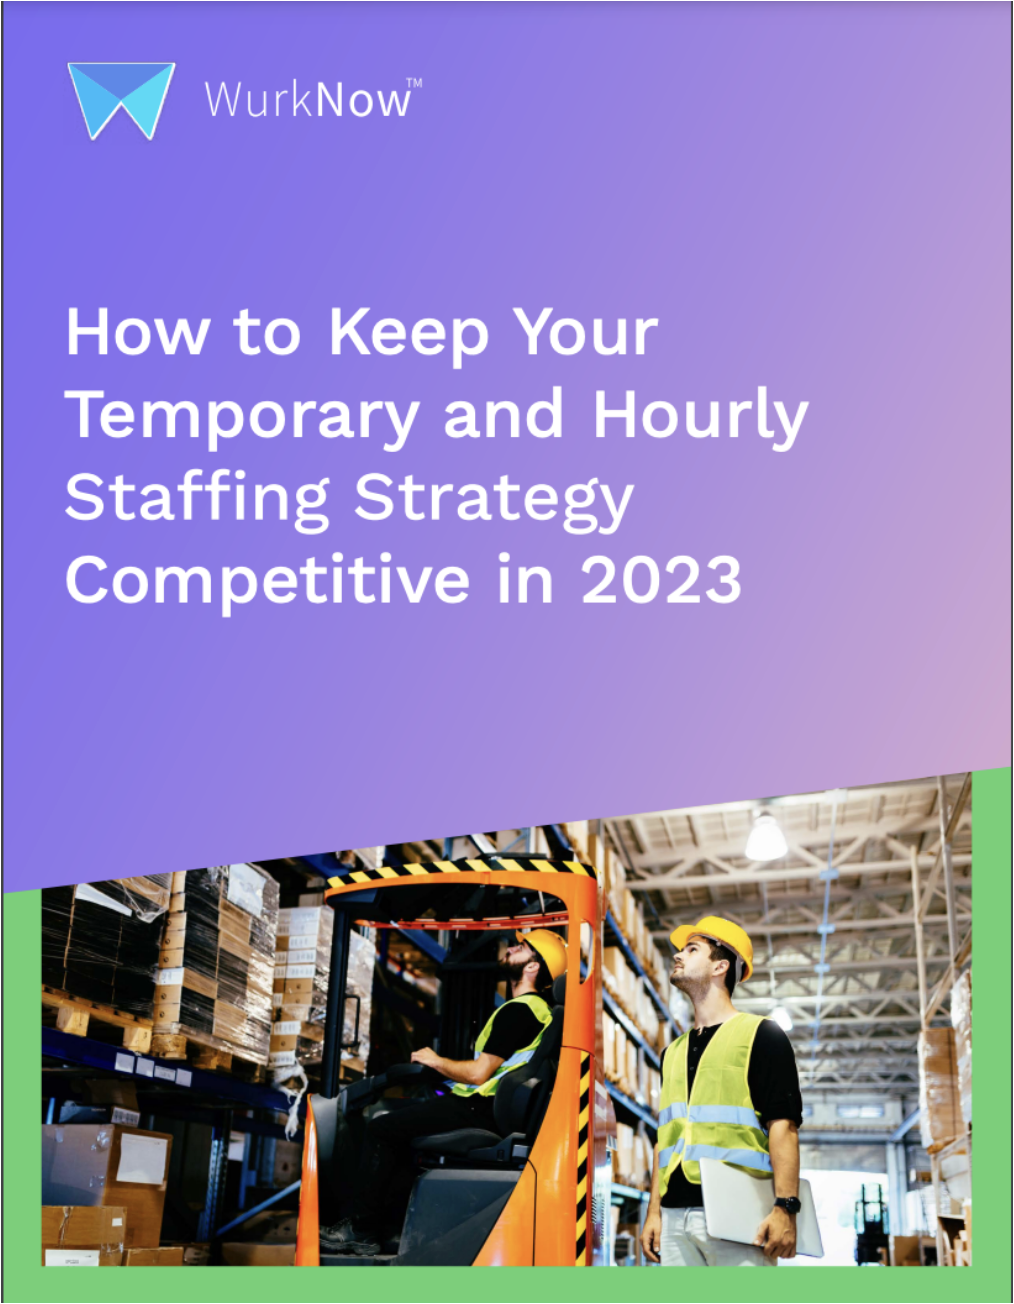 Competitive Staffing Strategy White Paper Cover Image